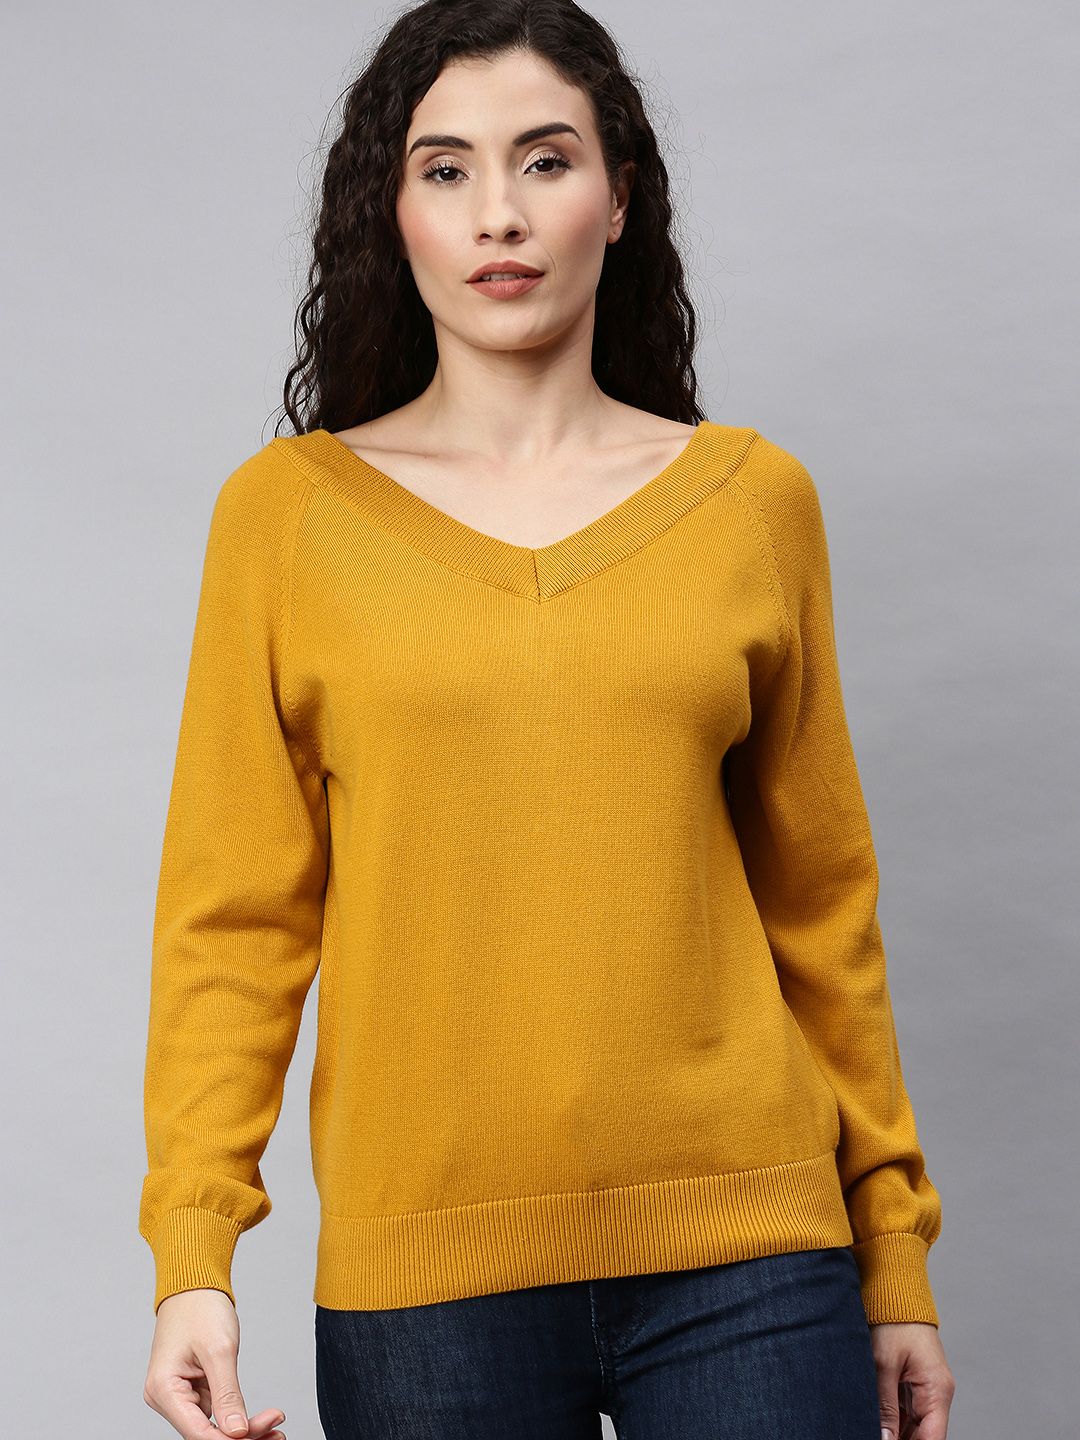 ONLY Women Mustard Yellow Solid Cotton Pullover Sweater Price in India